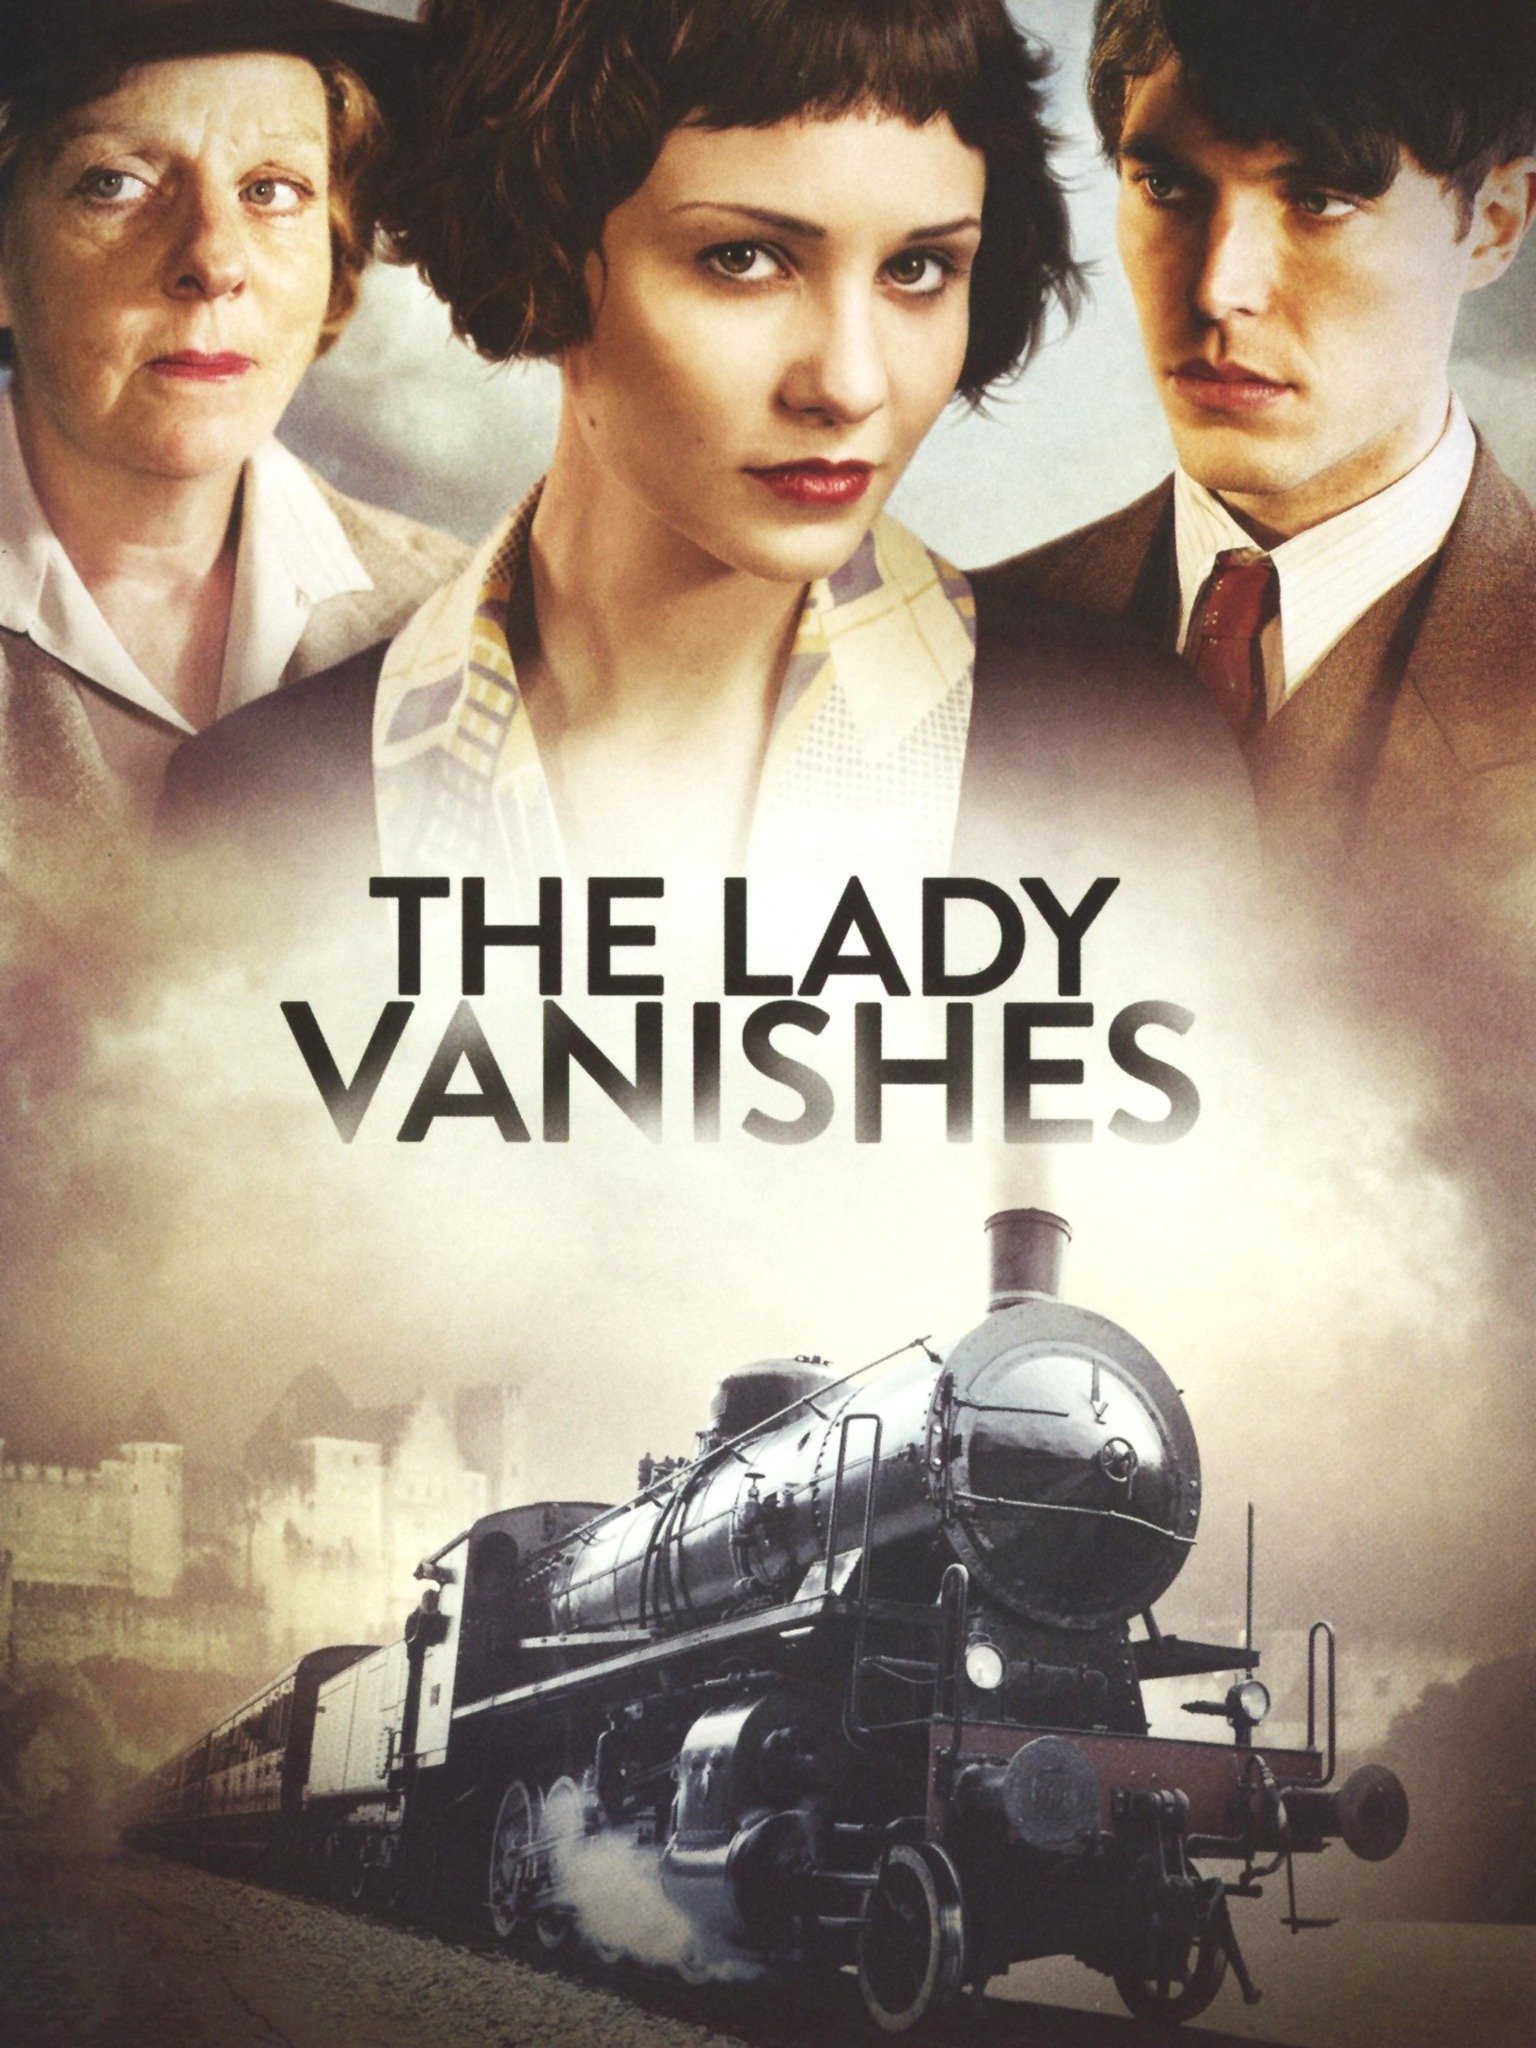 The Lady Vanishes Movie Reviews